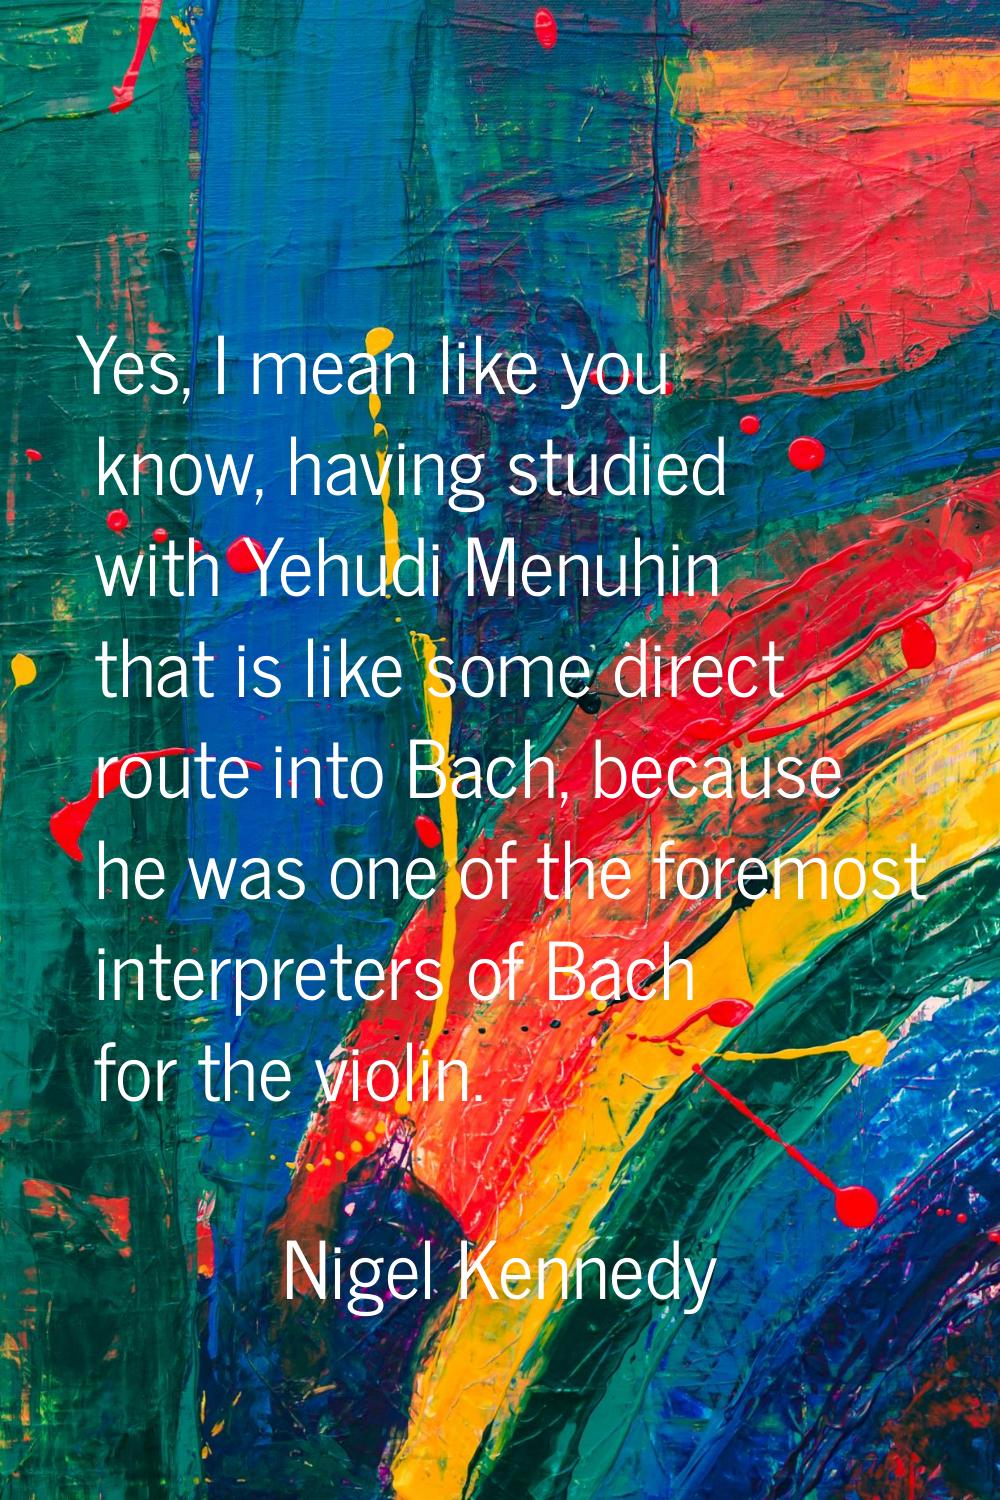 Yes, I mean like you know, having studied with Yehudi Menuhin that is like some direct route into B